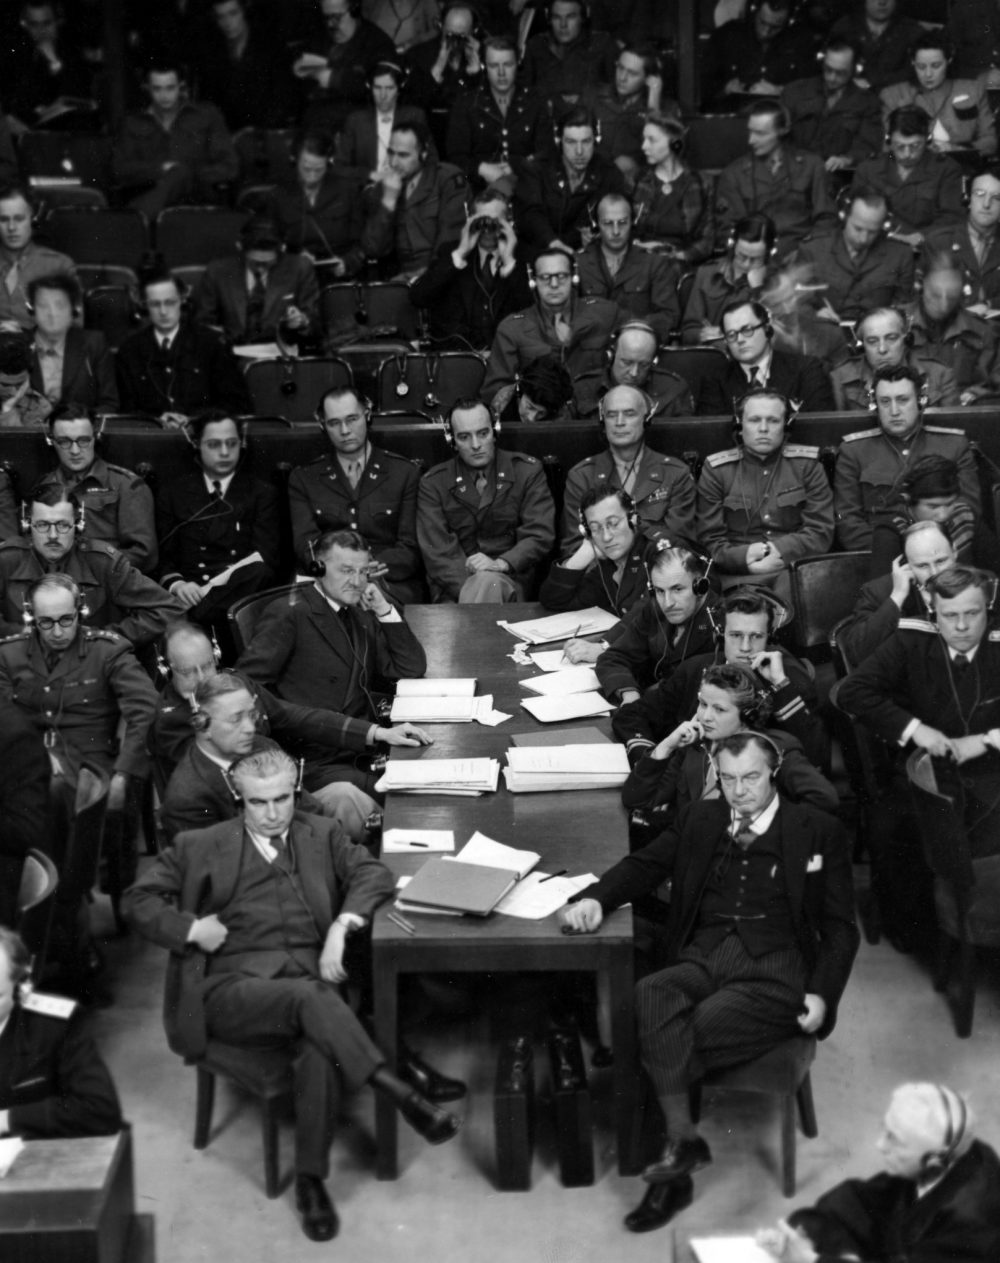 Robert H. Jackson and legal team members at the United States Prosecutor Table at the International Military Tribunal at Nuremberg